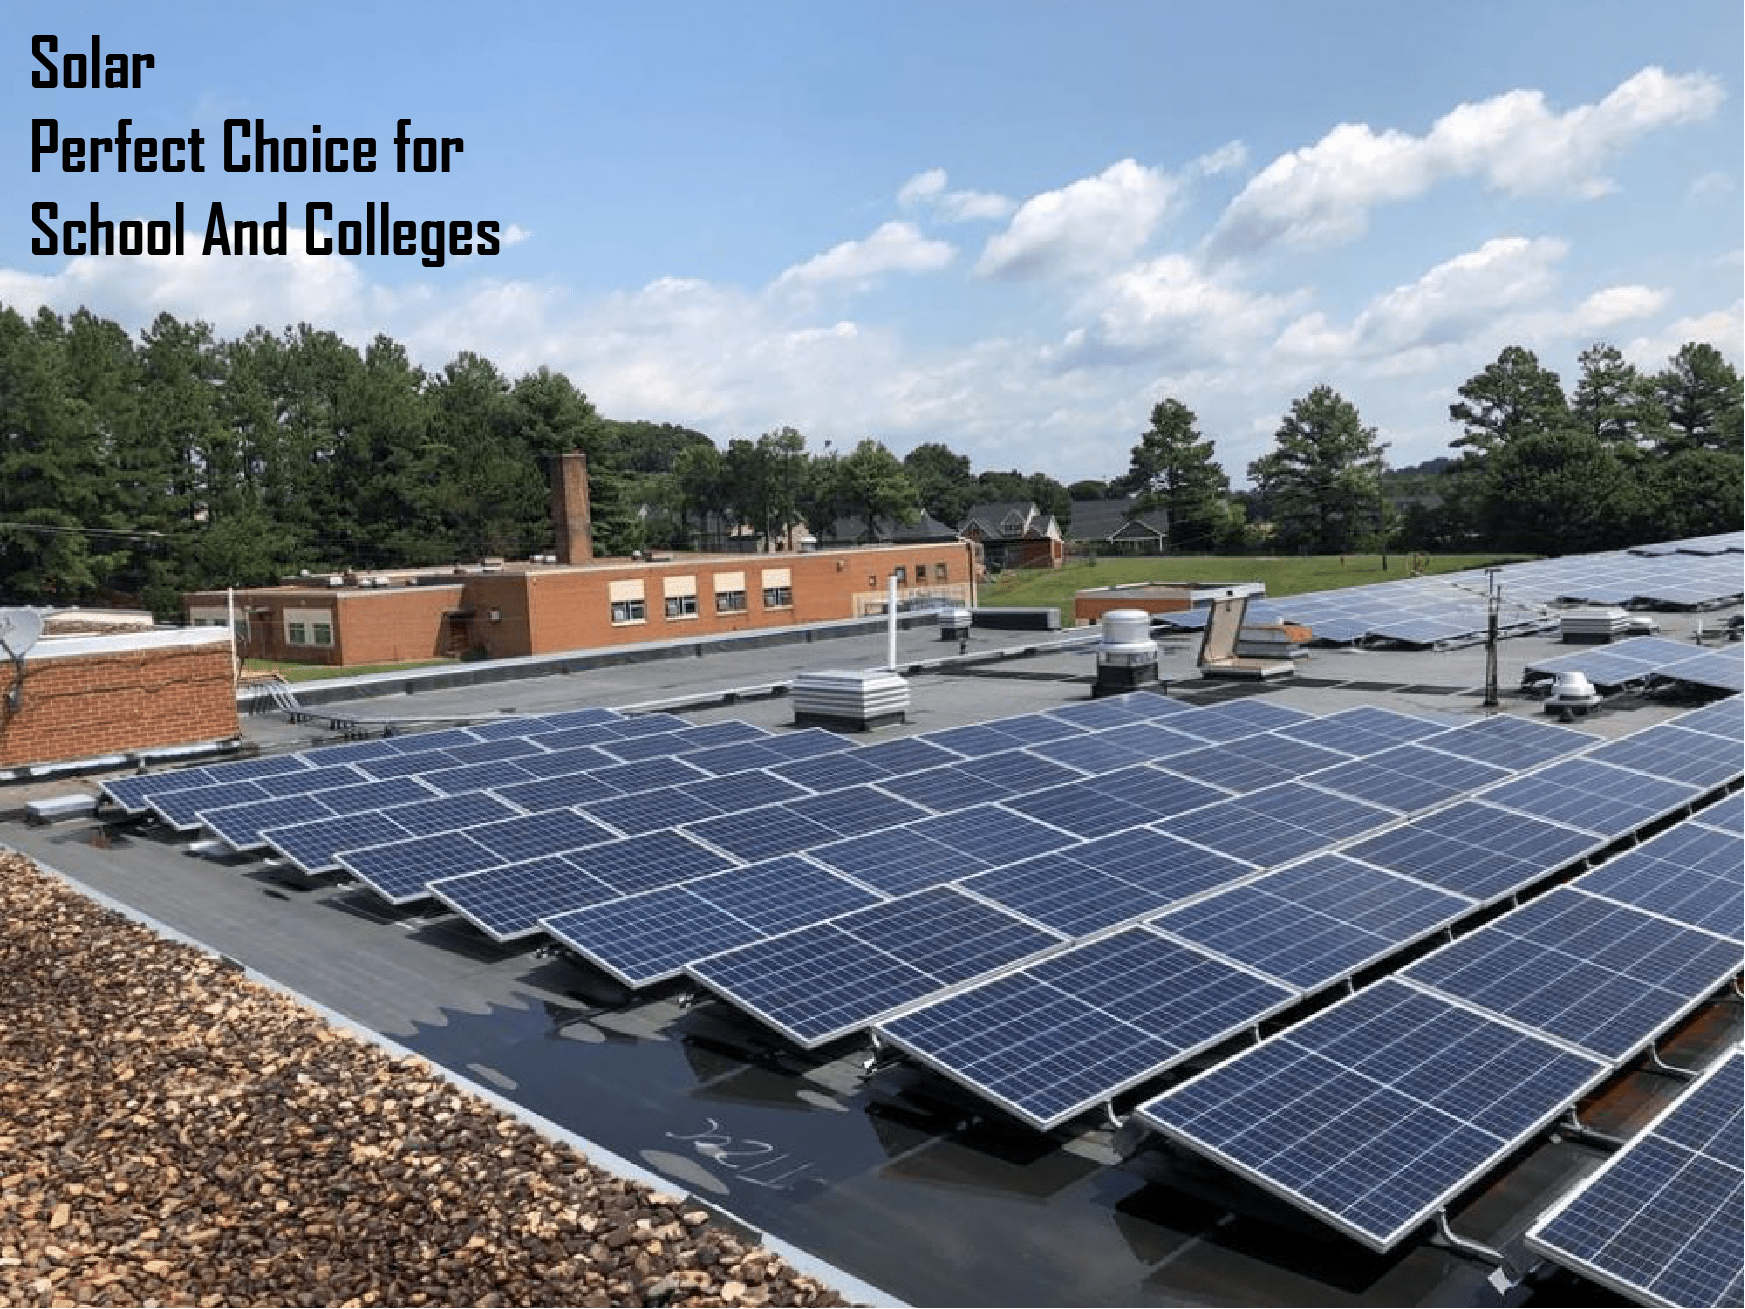 Why Solar for Schools and Colleges Is the Perfect Choice This Year